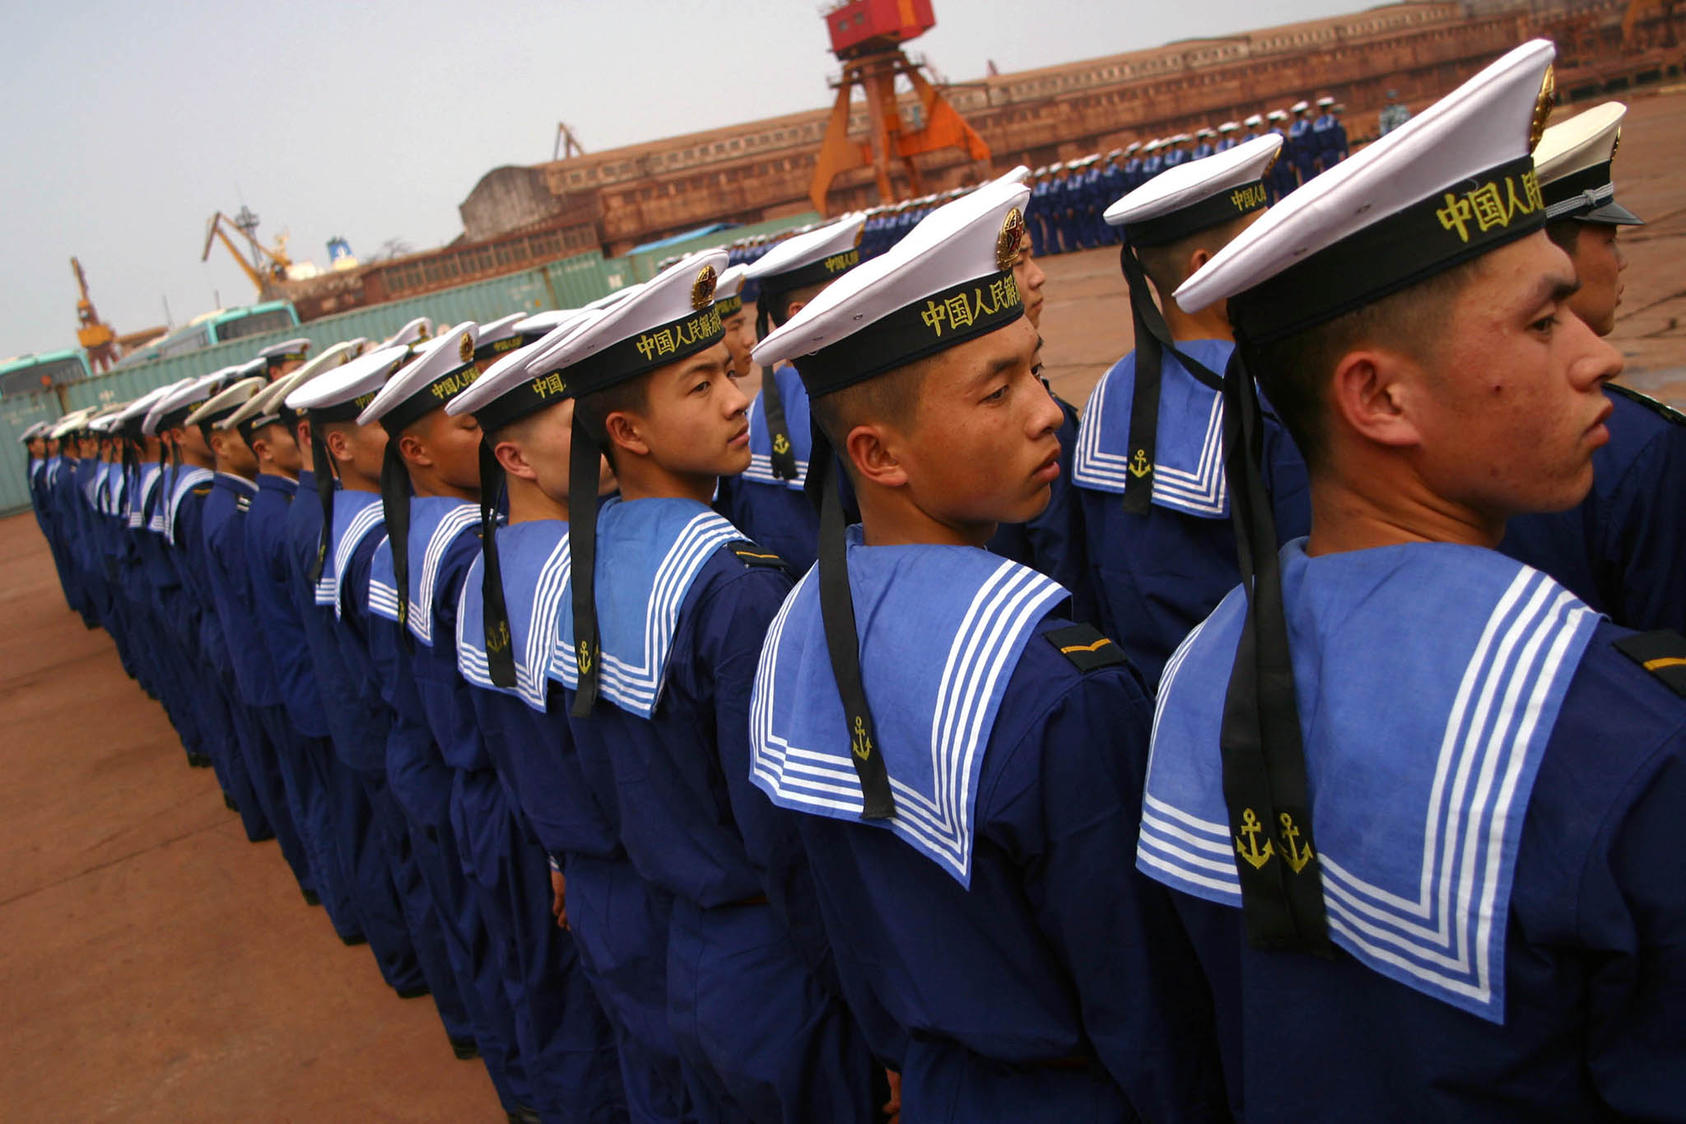 Chinese Navy sailors in Zhanjiang, China. China’s Naval fleet is the largest in the world as of 2014, although the U.S. Navy is still considered more powerful. (Nelson Ching/The New York Times)